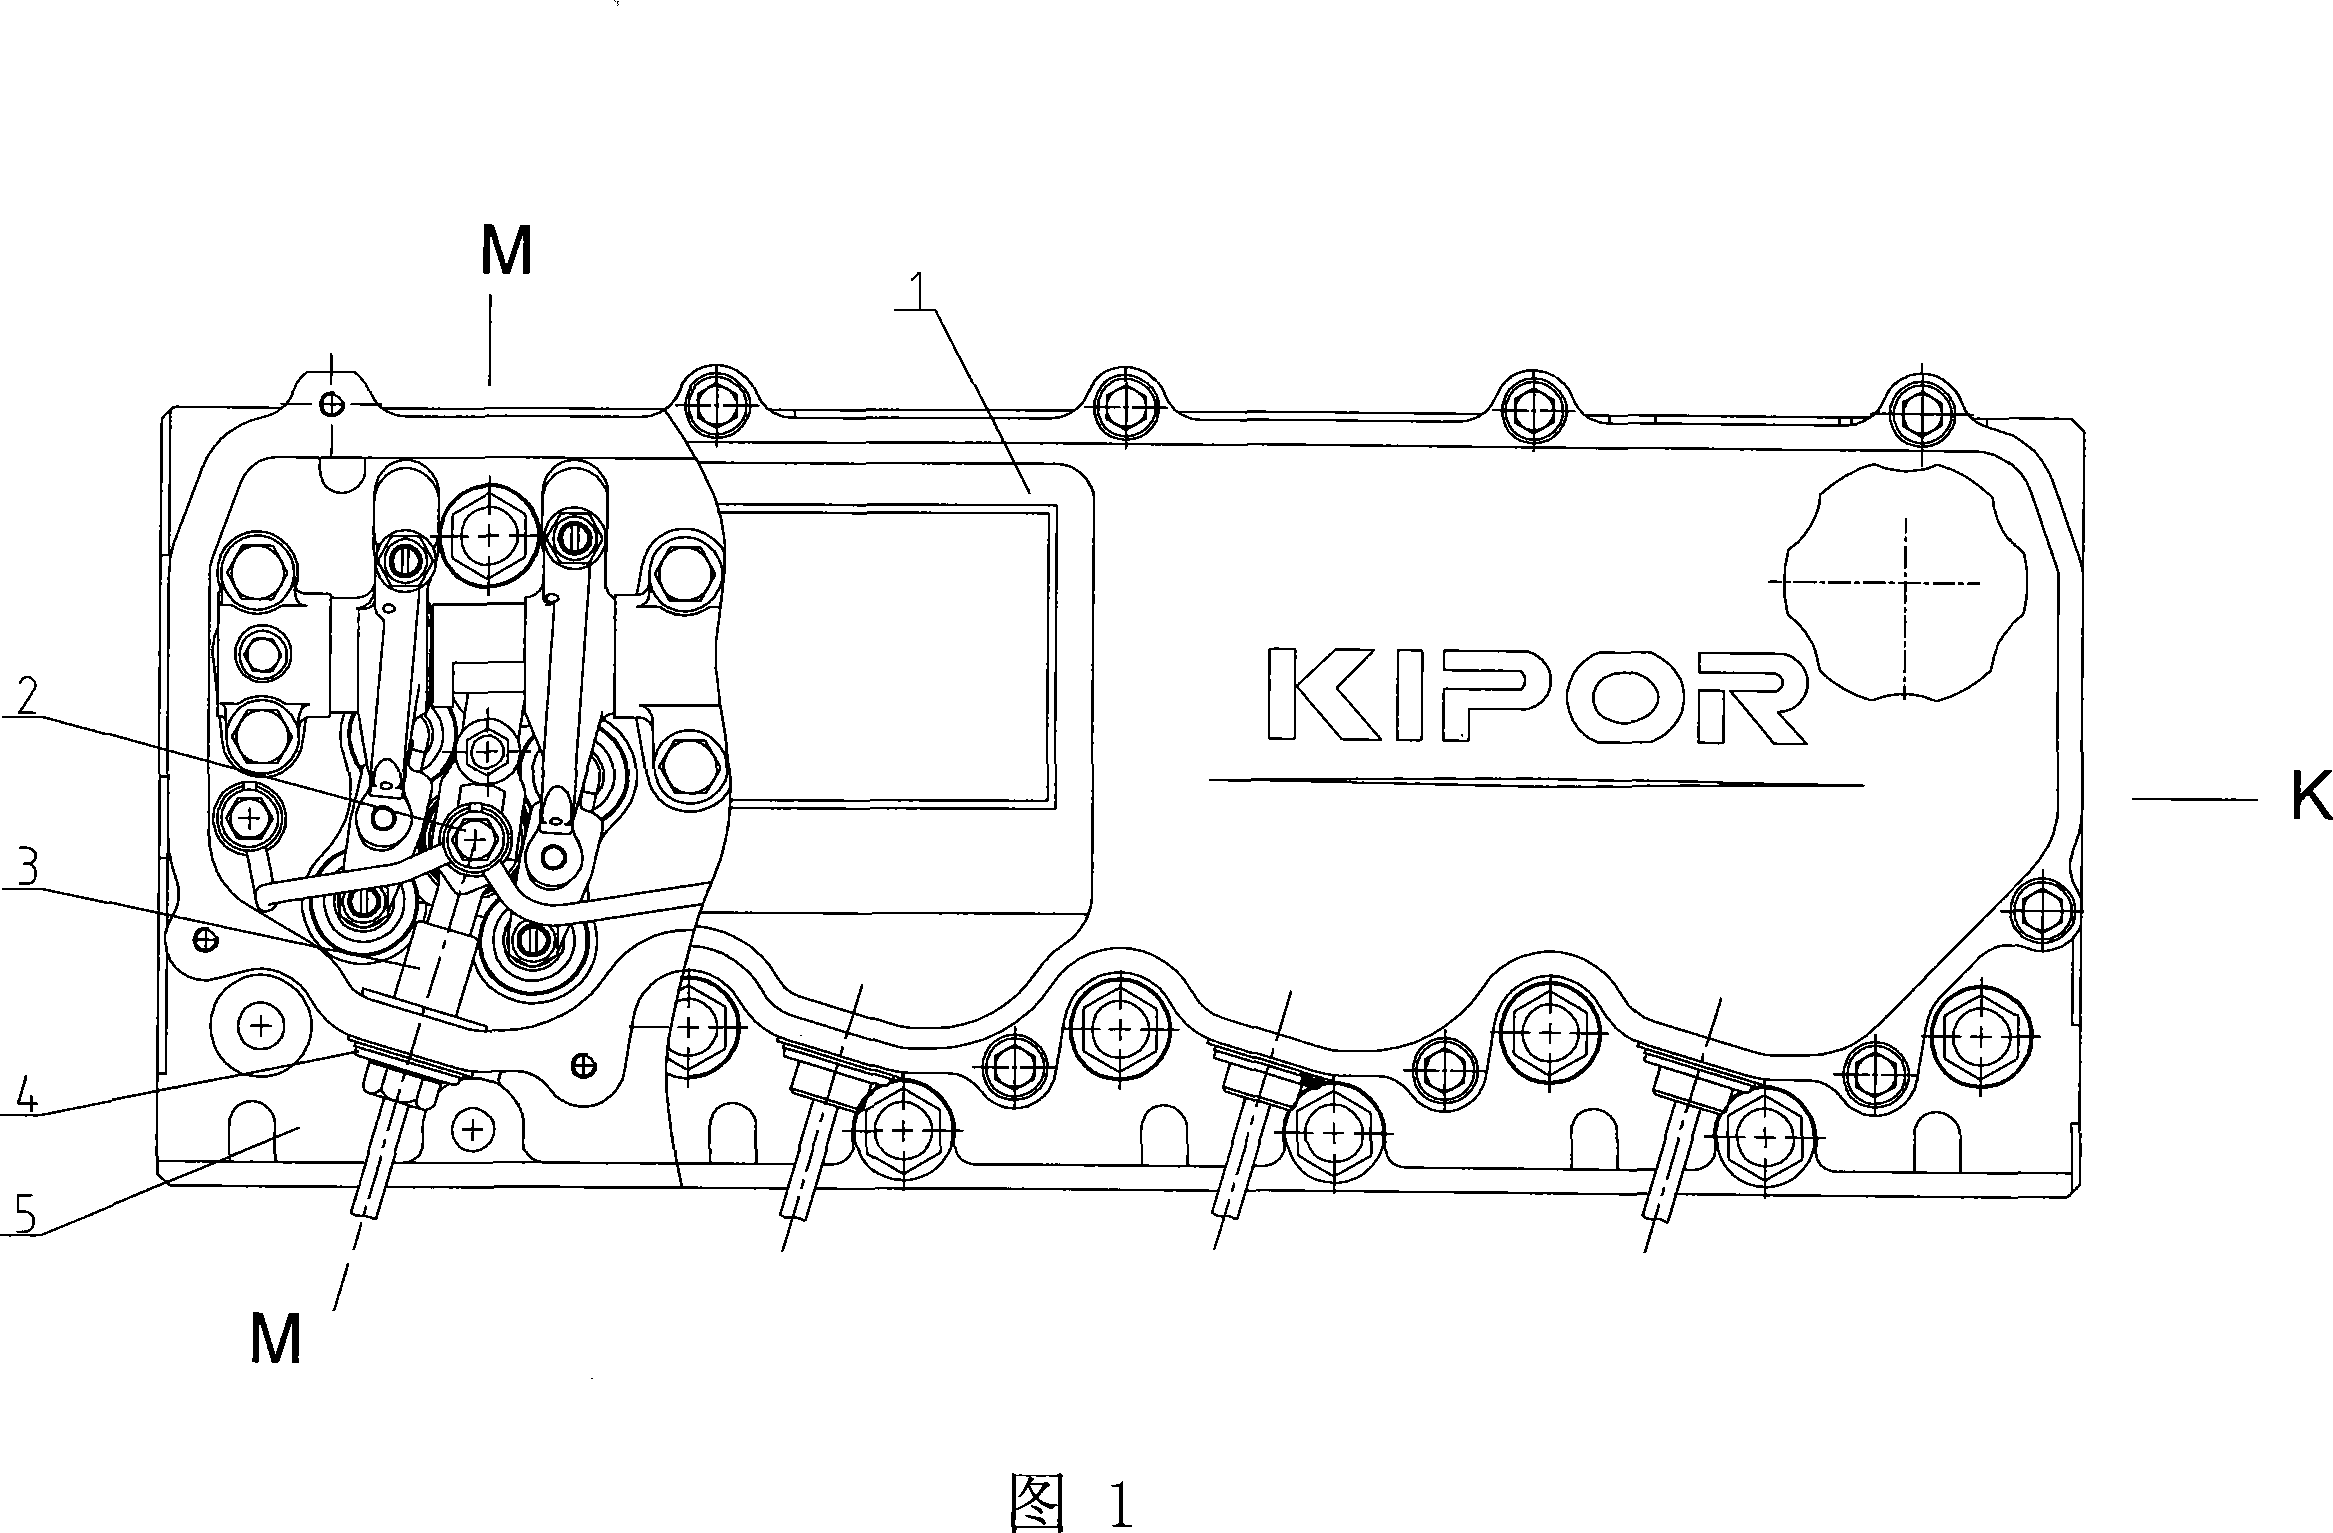 Diesel engine fuel injector mounting structure